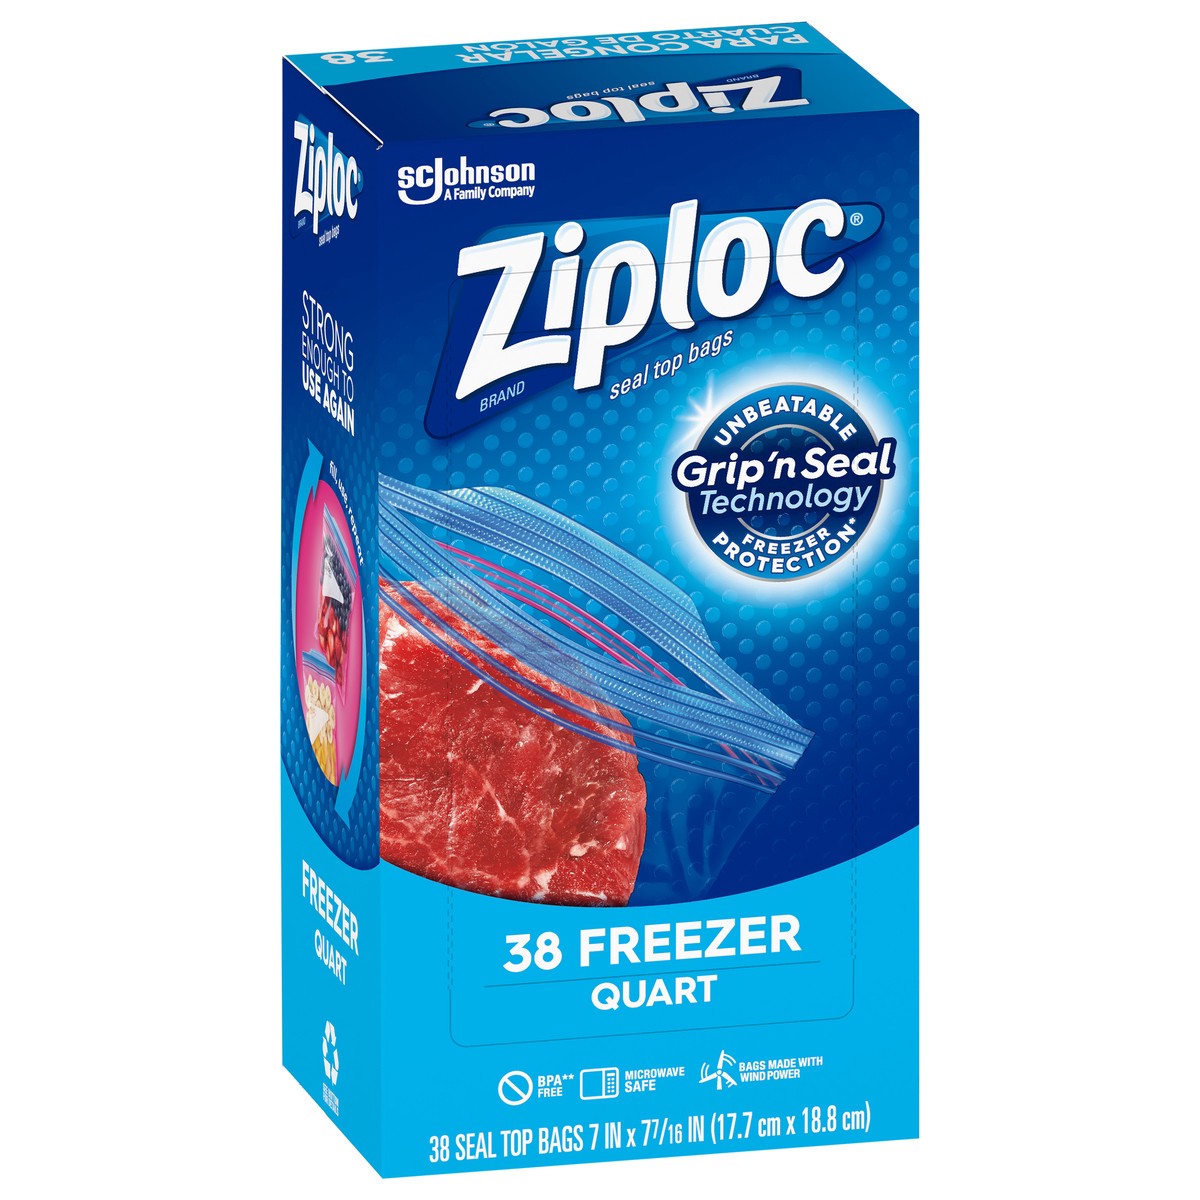 slide 2 of 6, Ziploc Brand Freezer Bags with New Stay Open Design, Quart, 38, Patented Stand-up Bottom, Easy to Fill Freezer Bag, Unloc a Free Set of Hands in the Kitchen, Microwave Safe, BPA Free, 38 ct